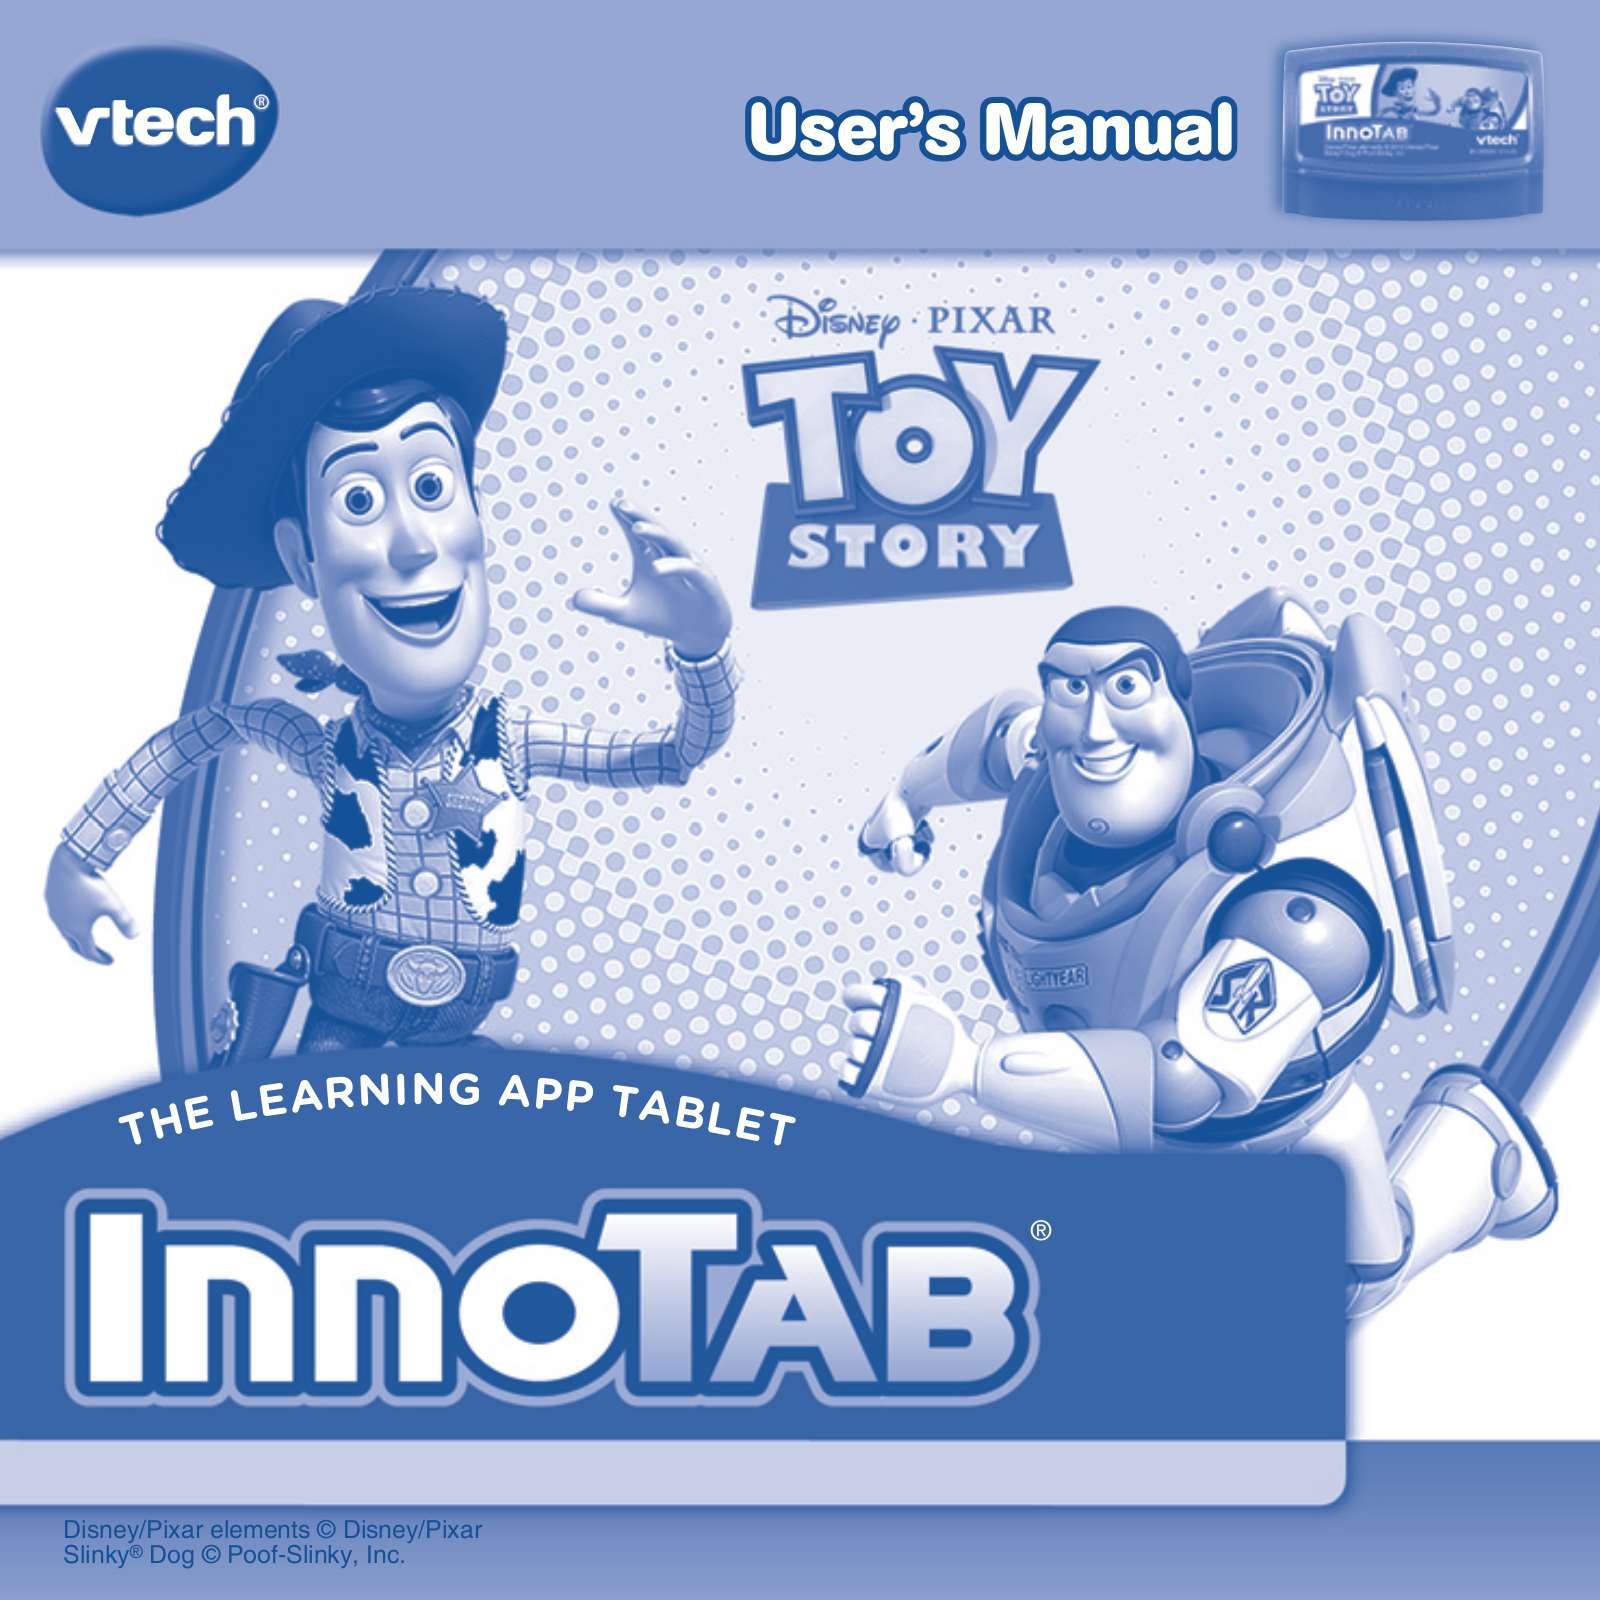 VTech Toy Story Owner's Manual